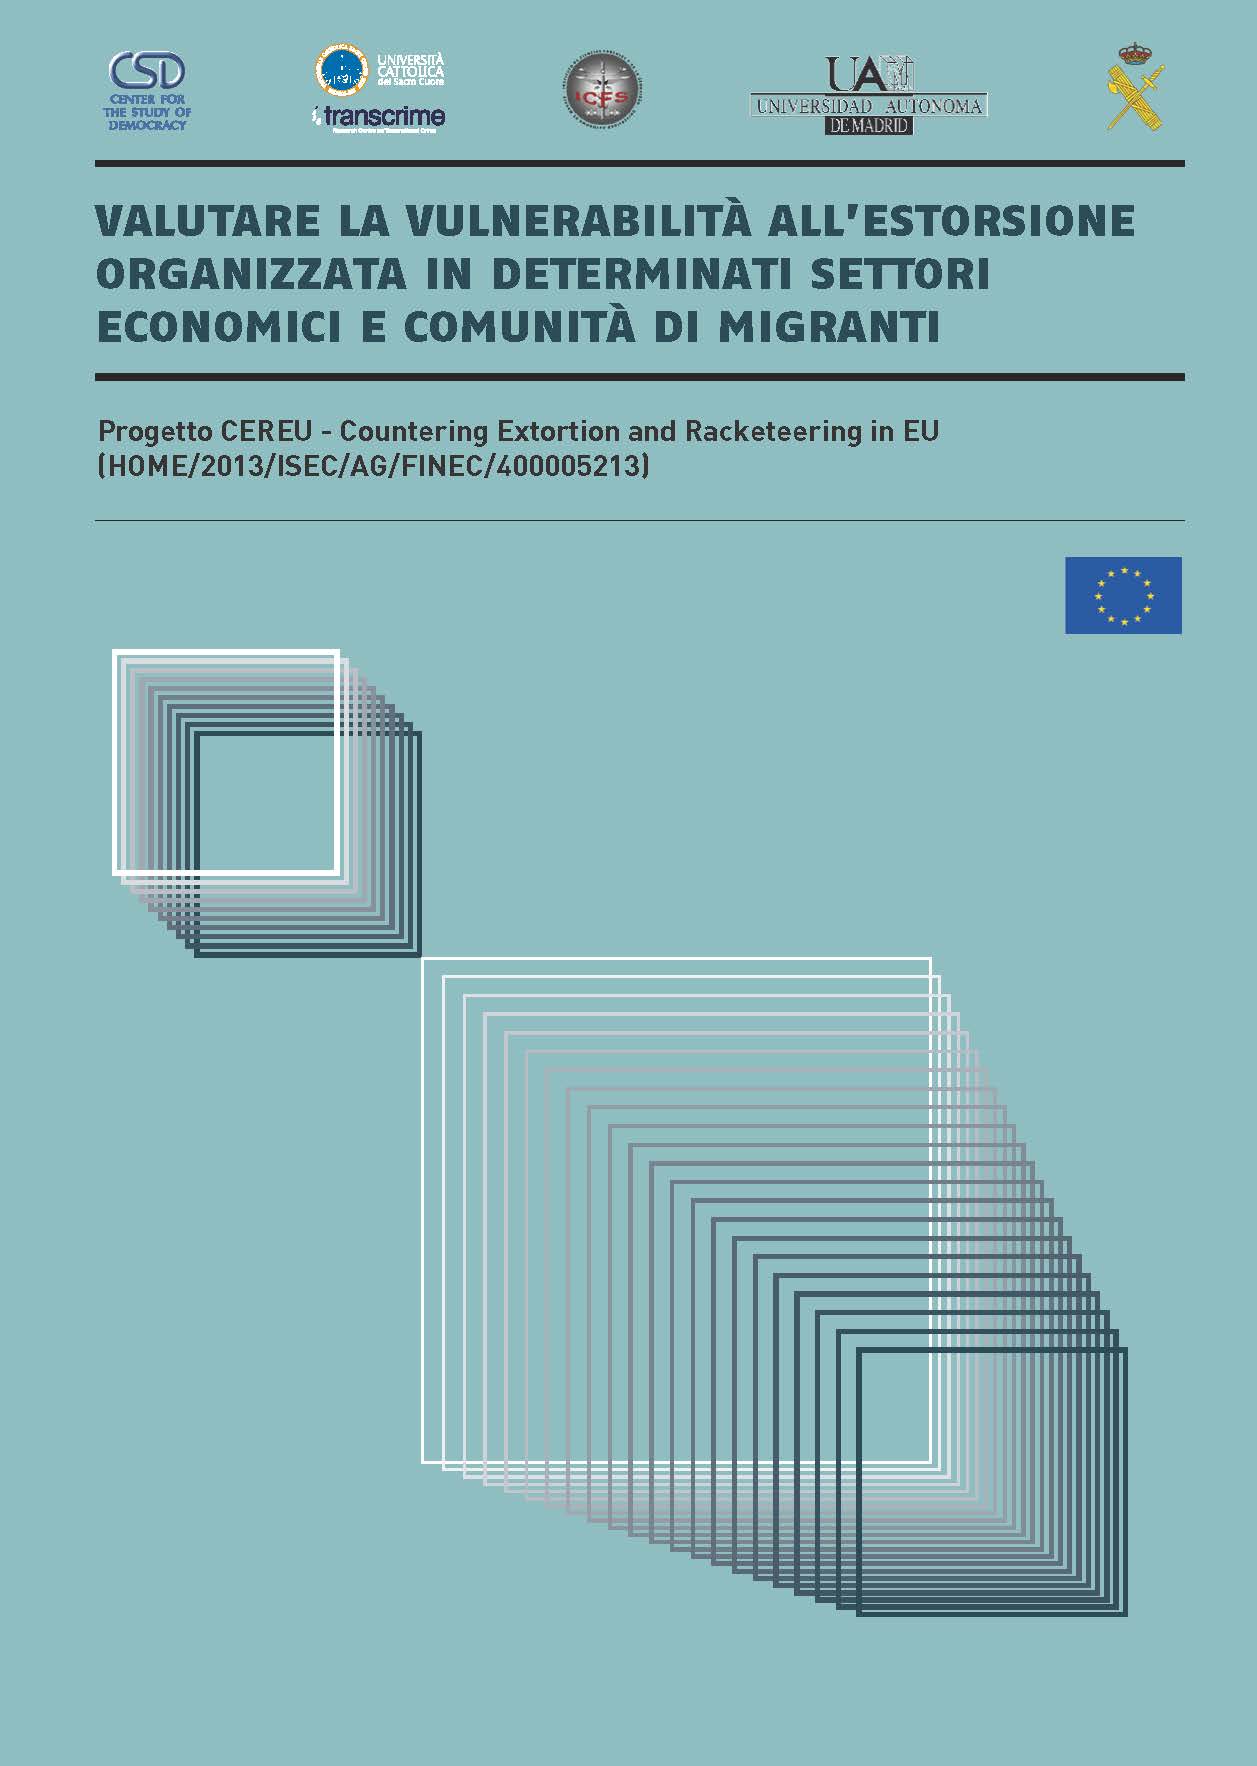 CSD Policy Brief No. 63: ASSESSING THE VULNERABILITY EXTORTION ORGANIZED IN CERTAIN SECTORS AND ECONOMIC COMMUNITY OF MIGRANTS